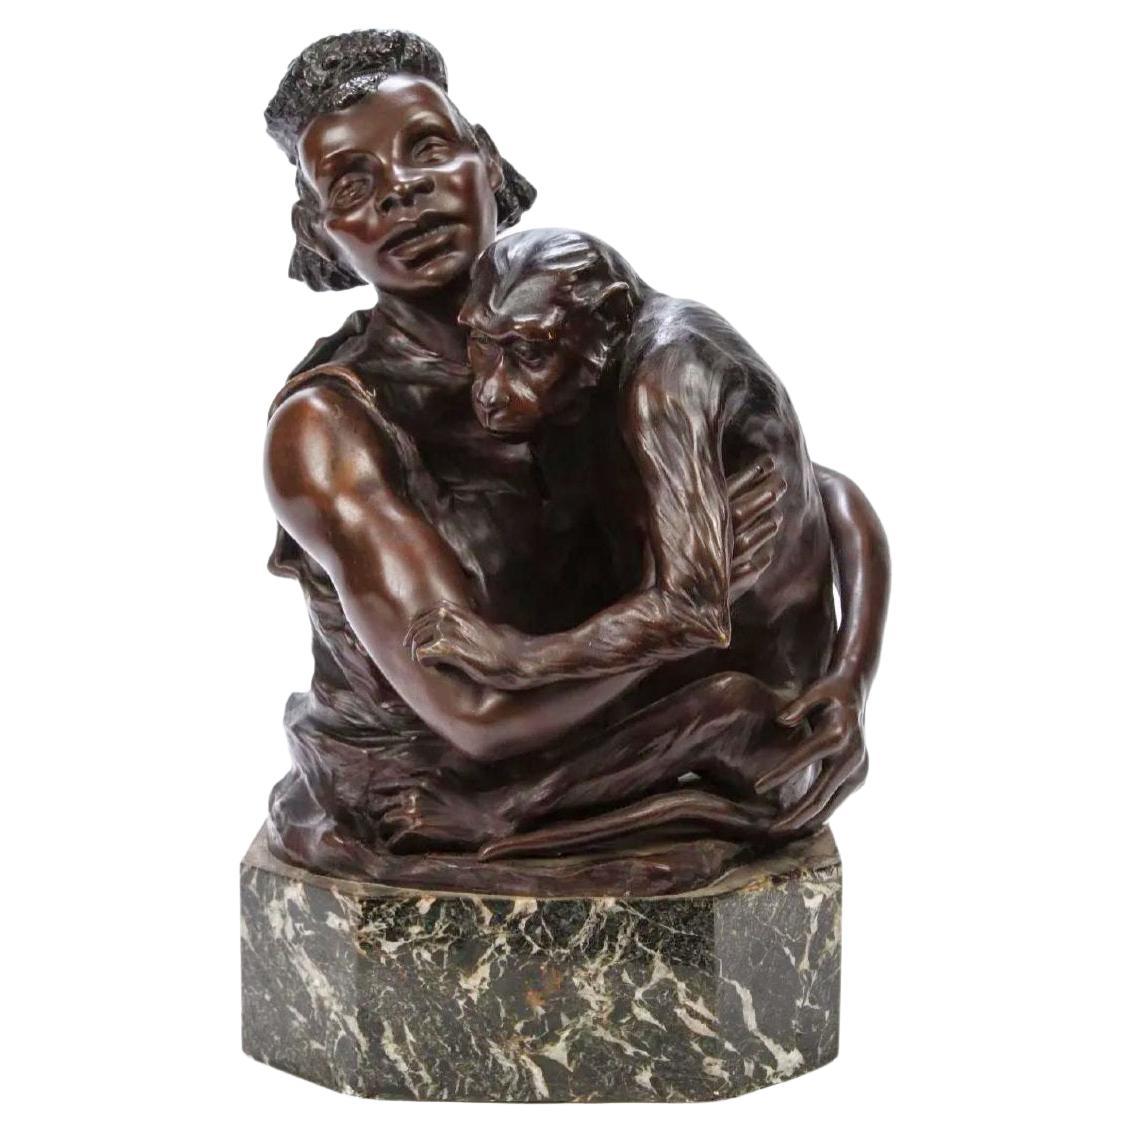 Man with Chimp Bronze and Marble Sculpture by Sandor